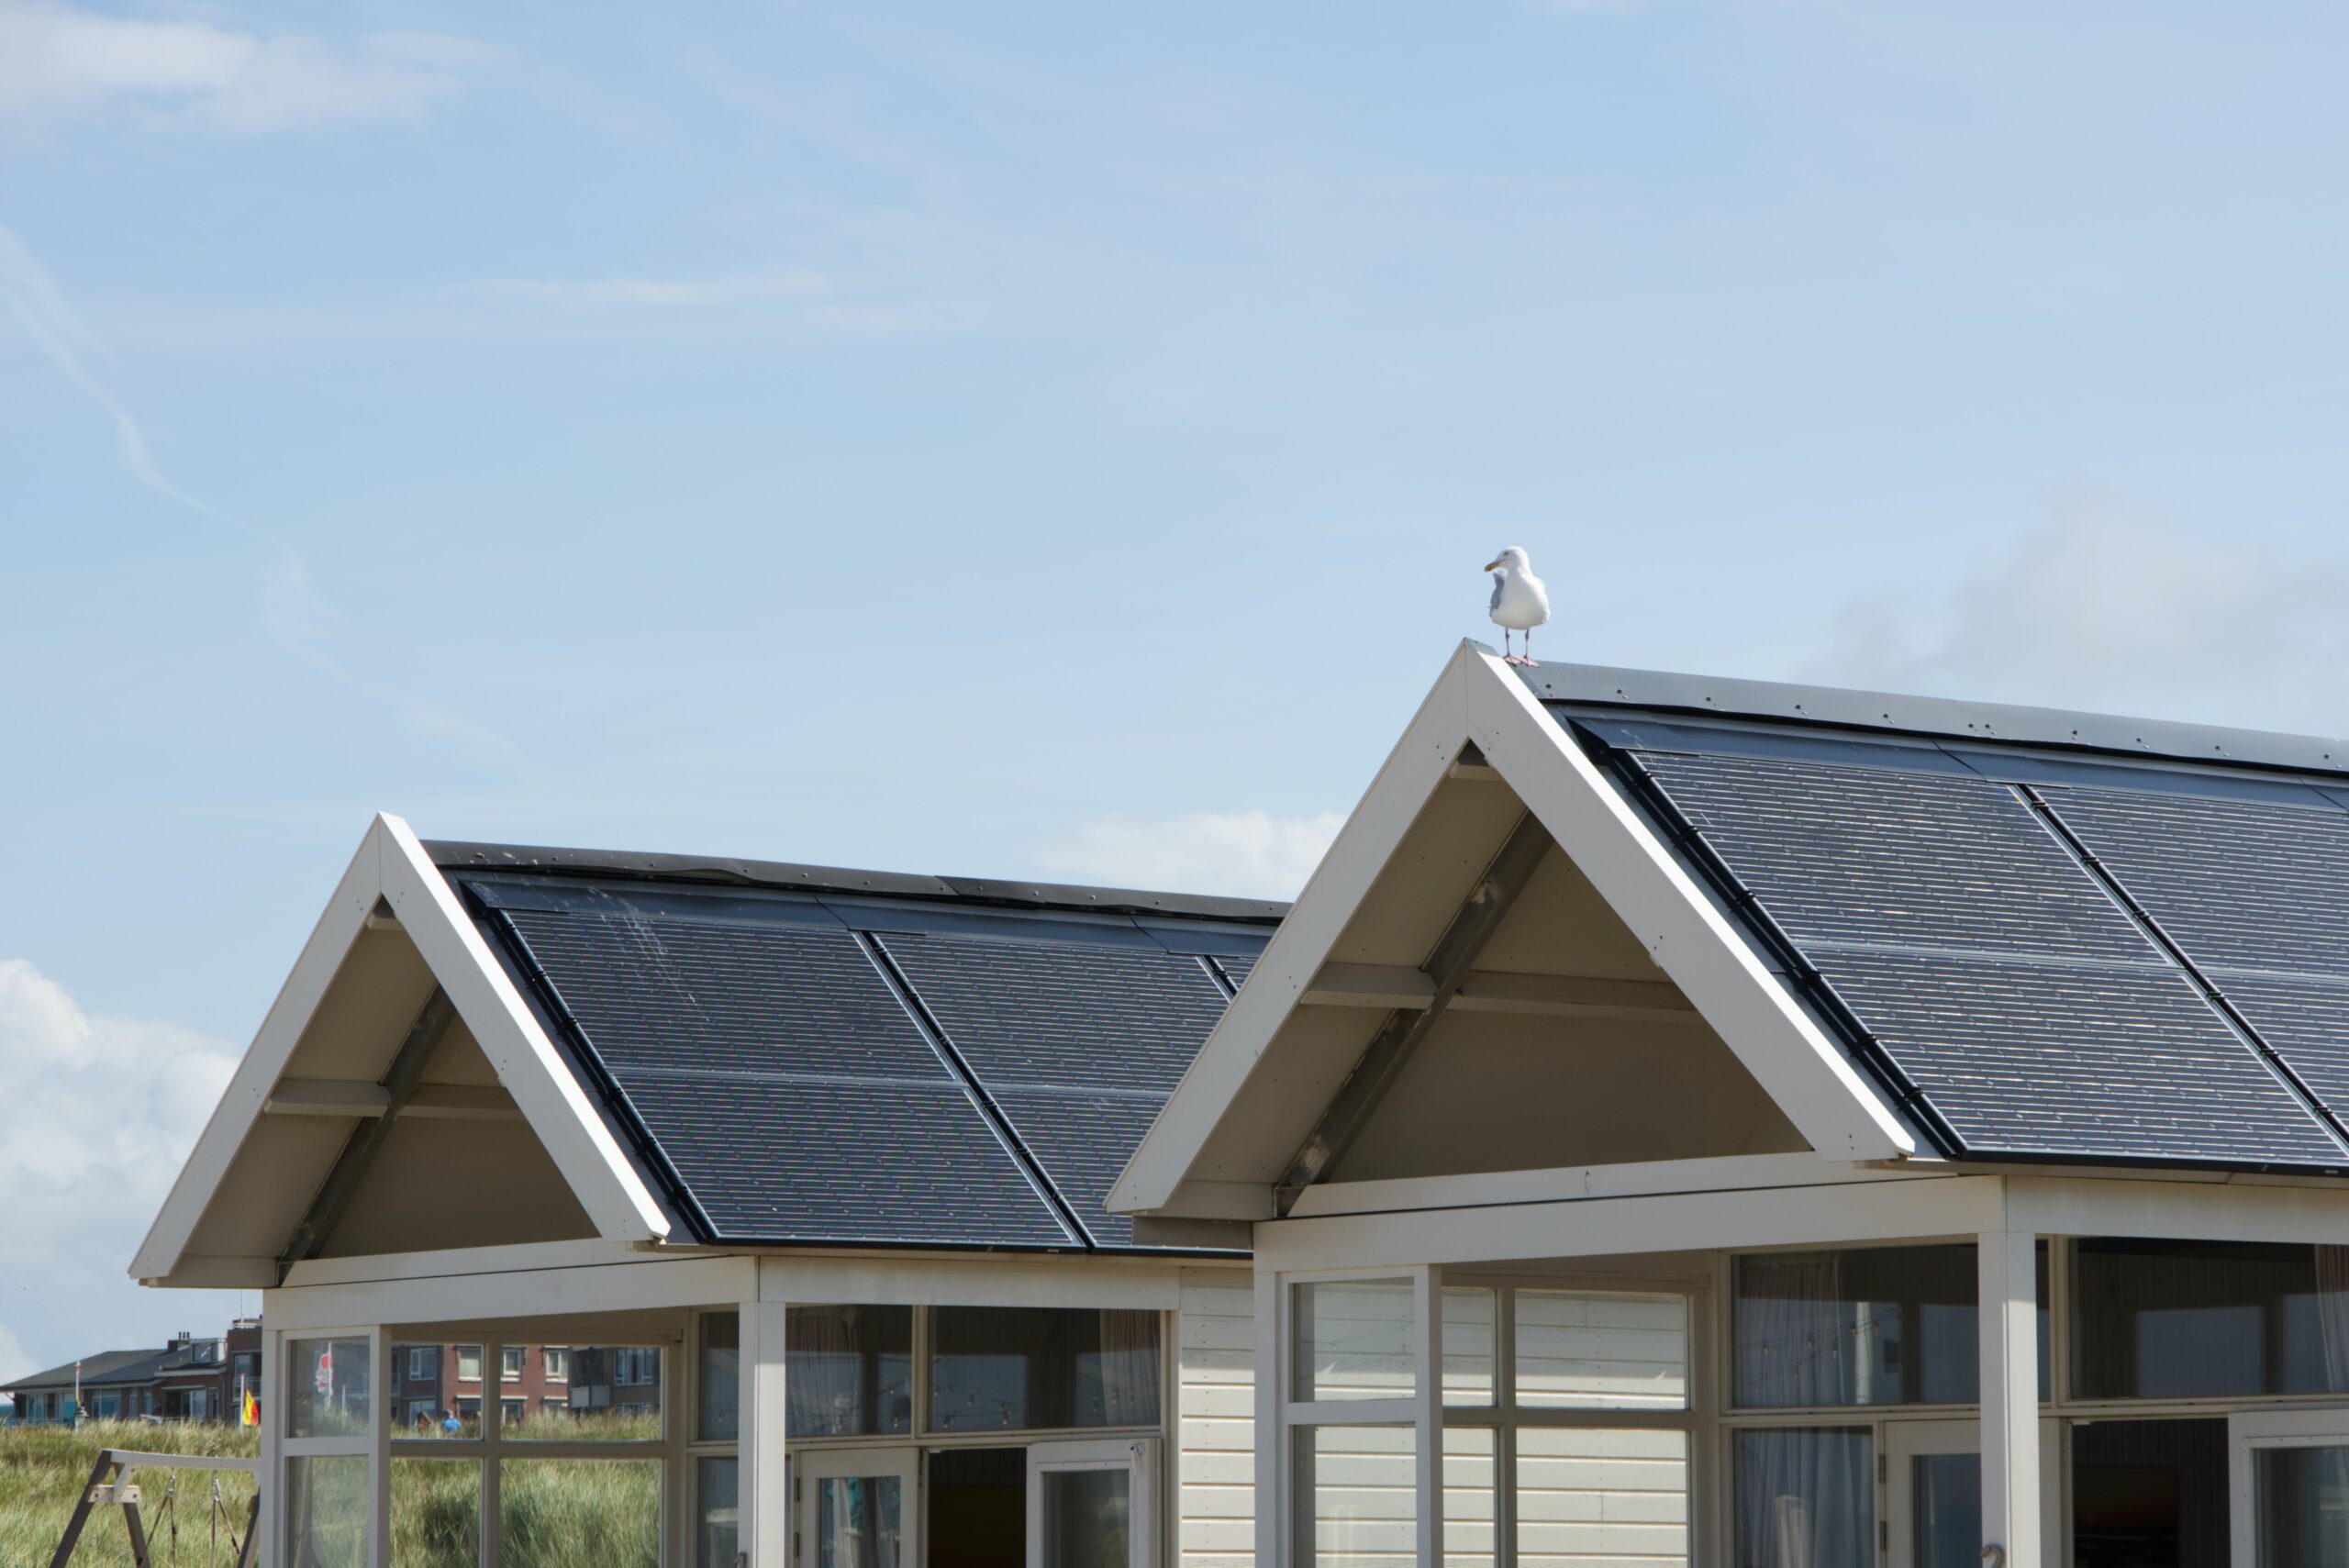 Solar panels on a roof, one of many green upgrades that increase your home value.